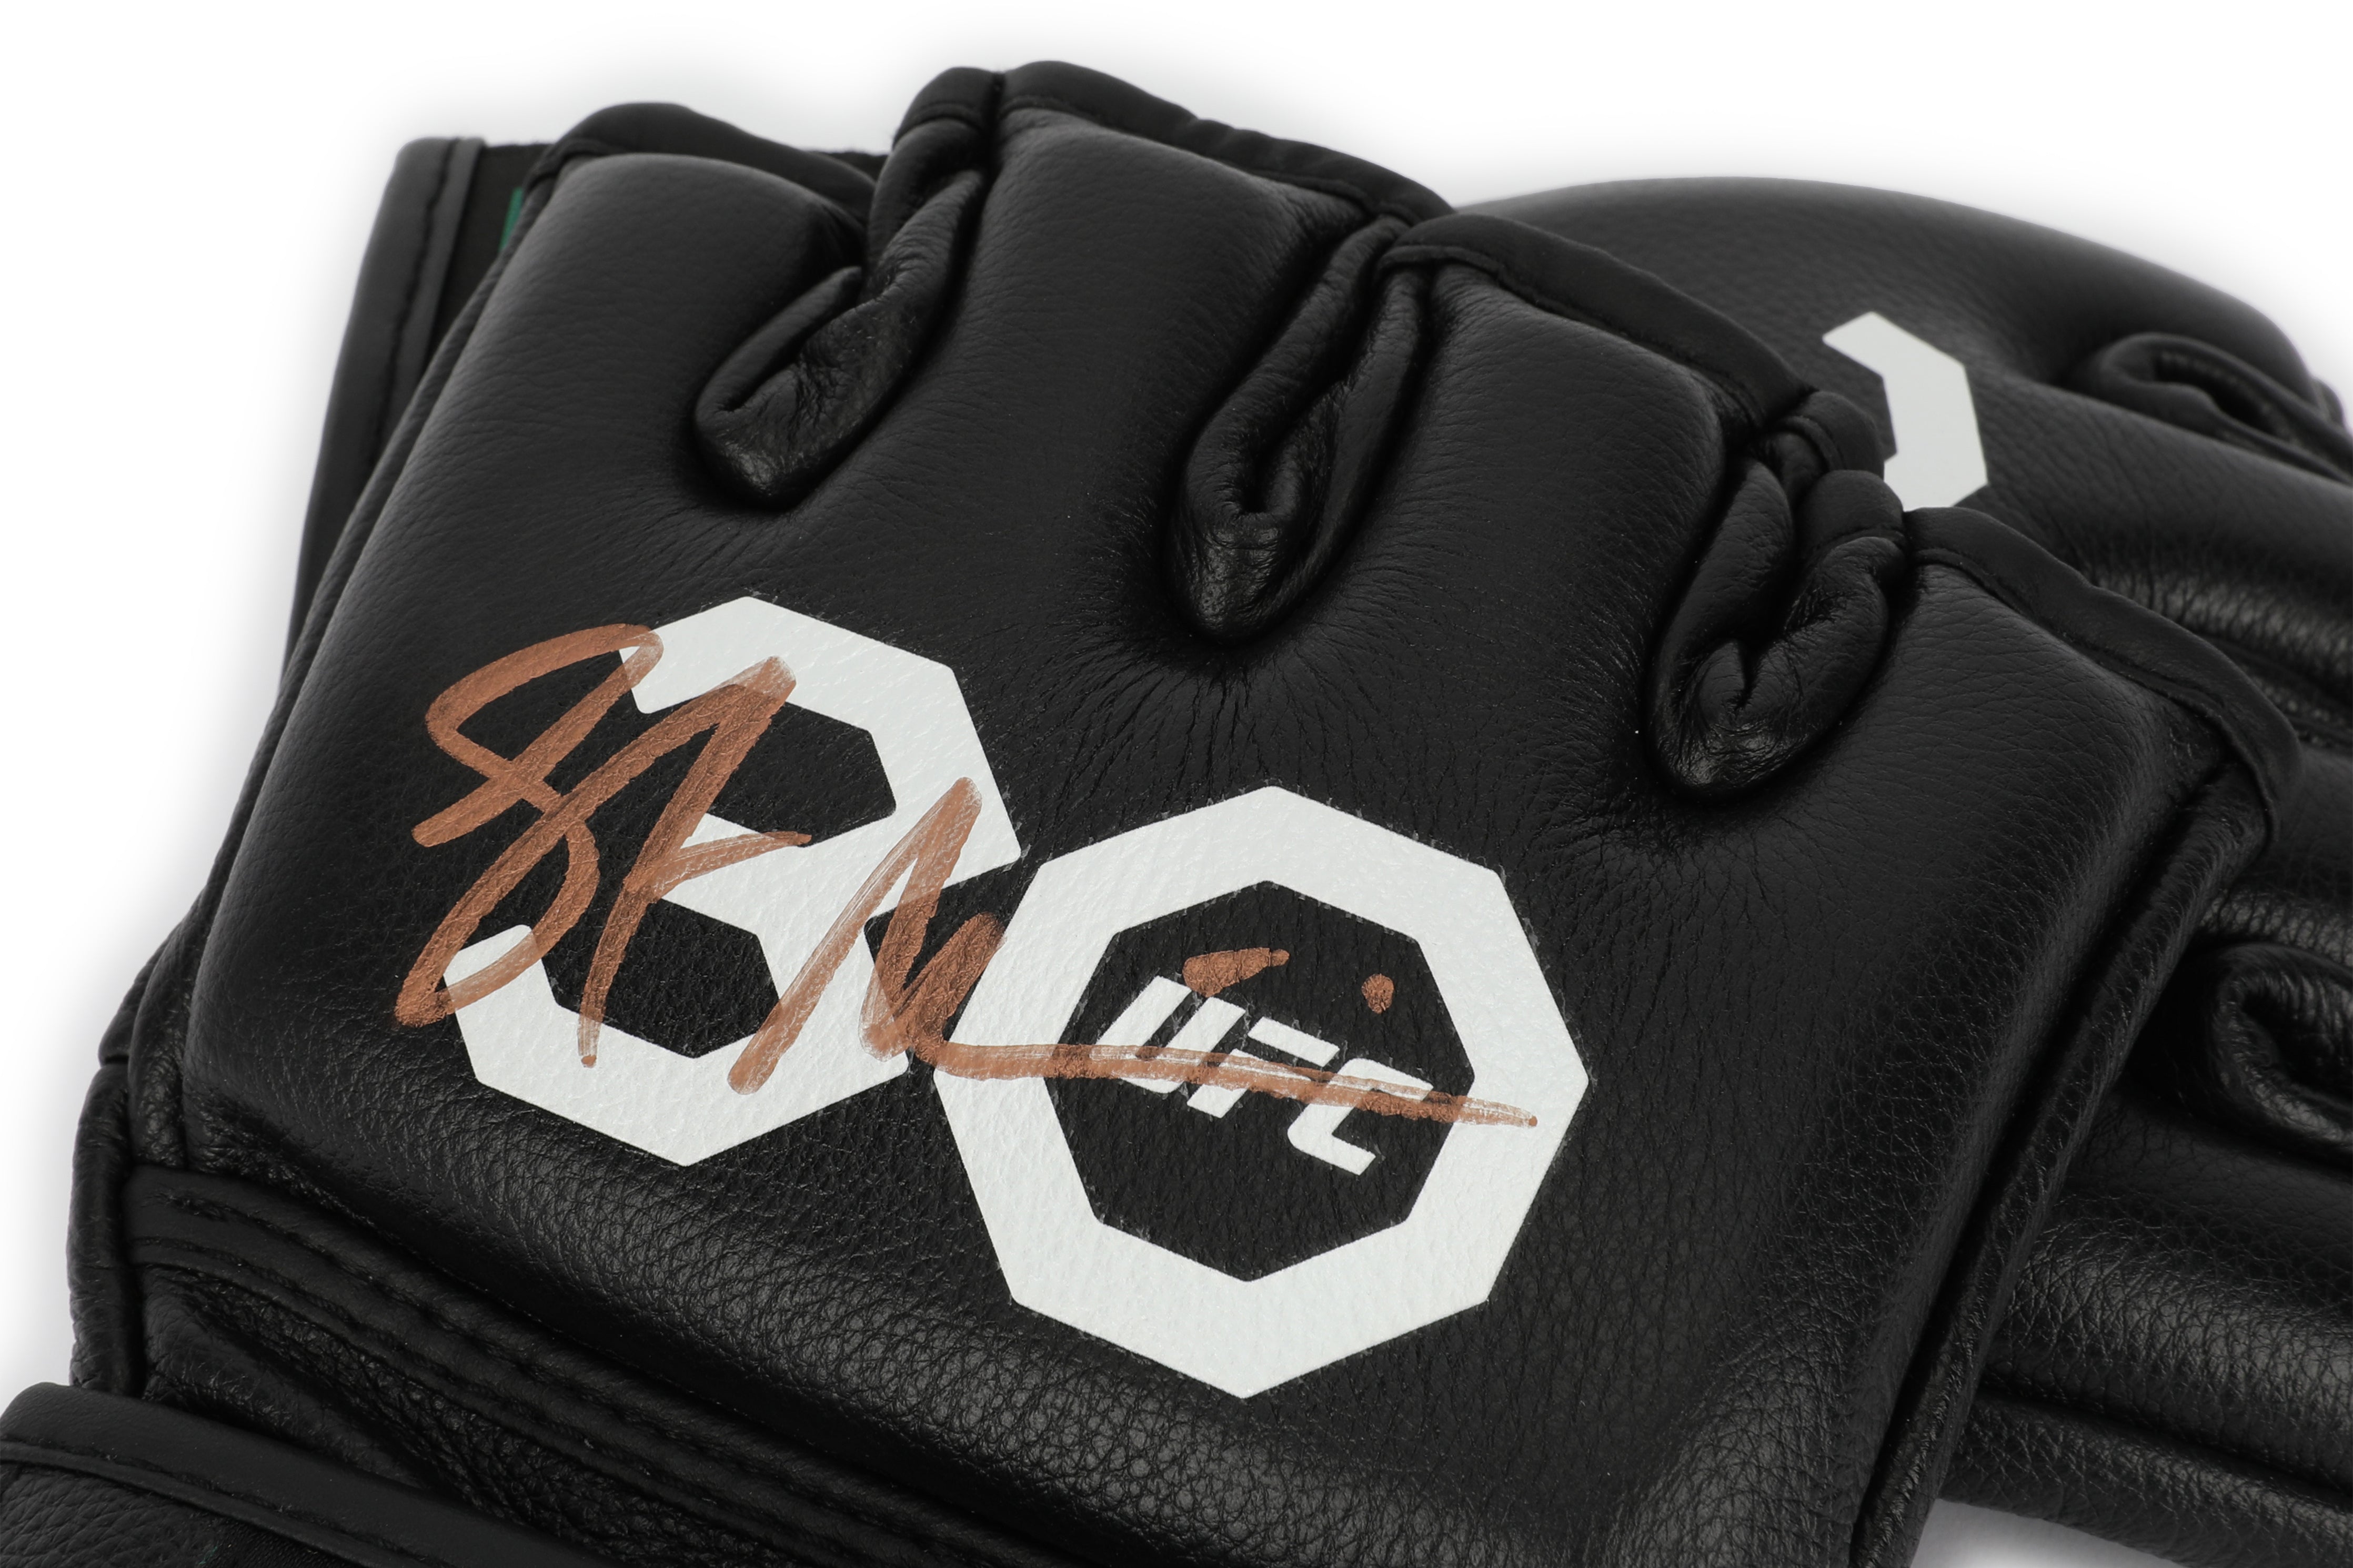 Stipe Miocic Signed Official UFC Gloves – 30th Anniversary Edition